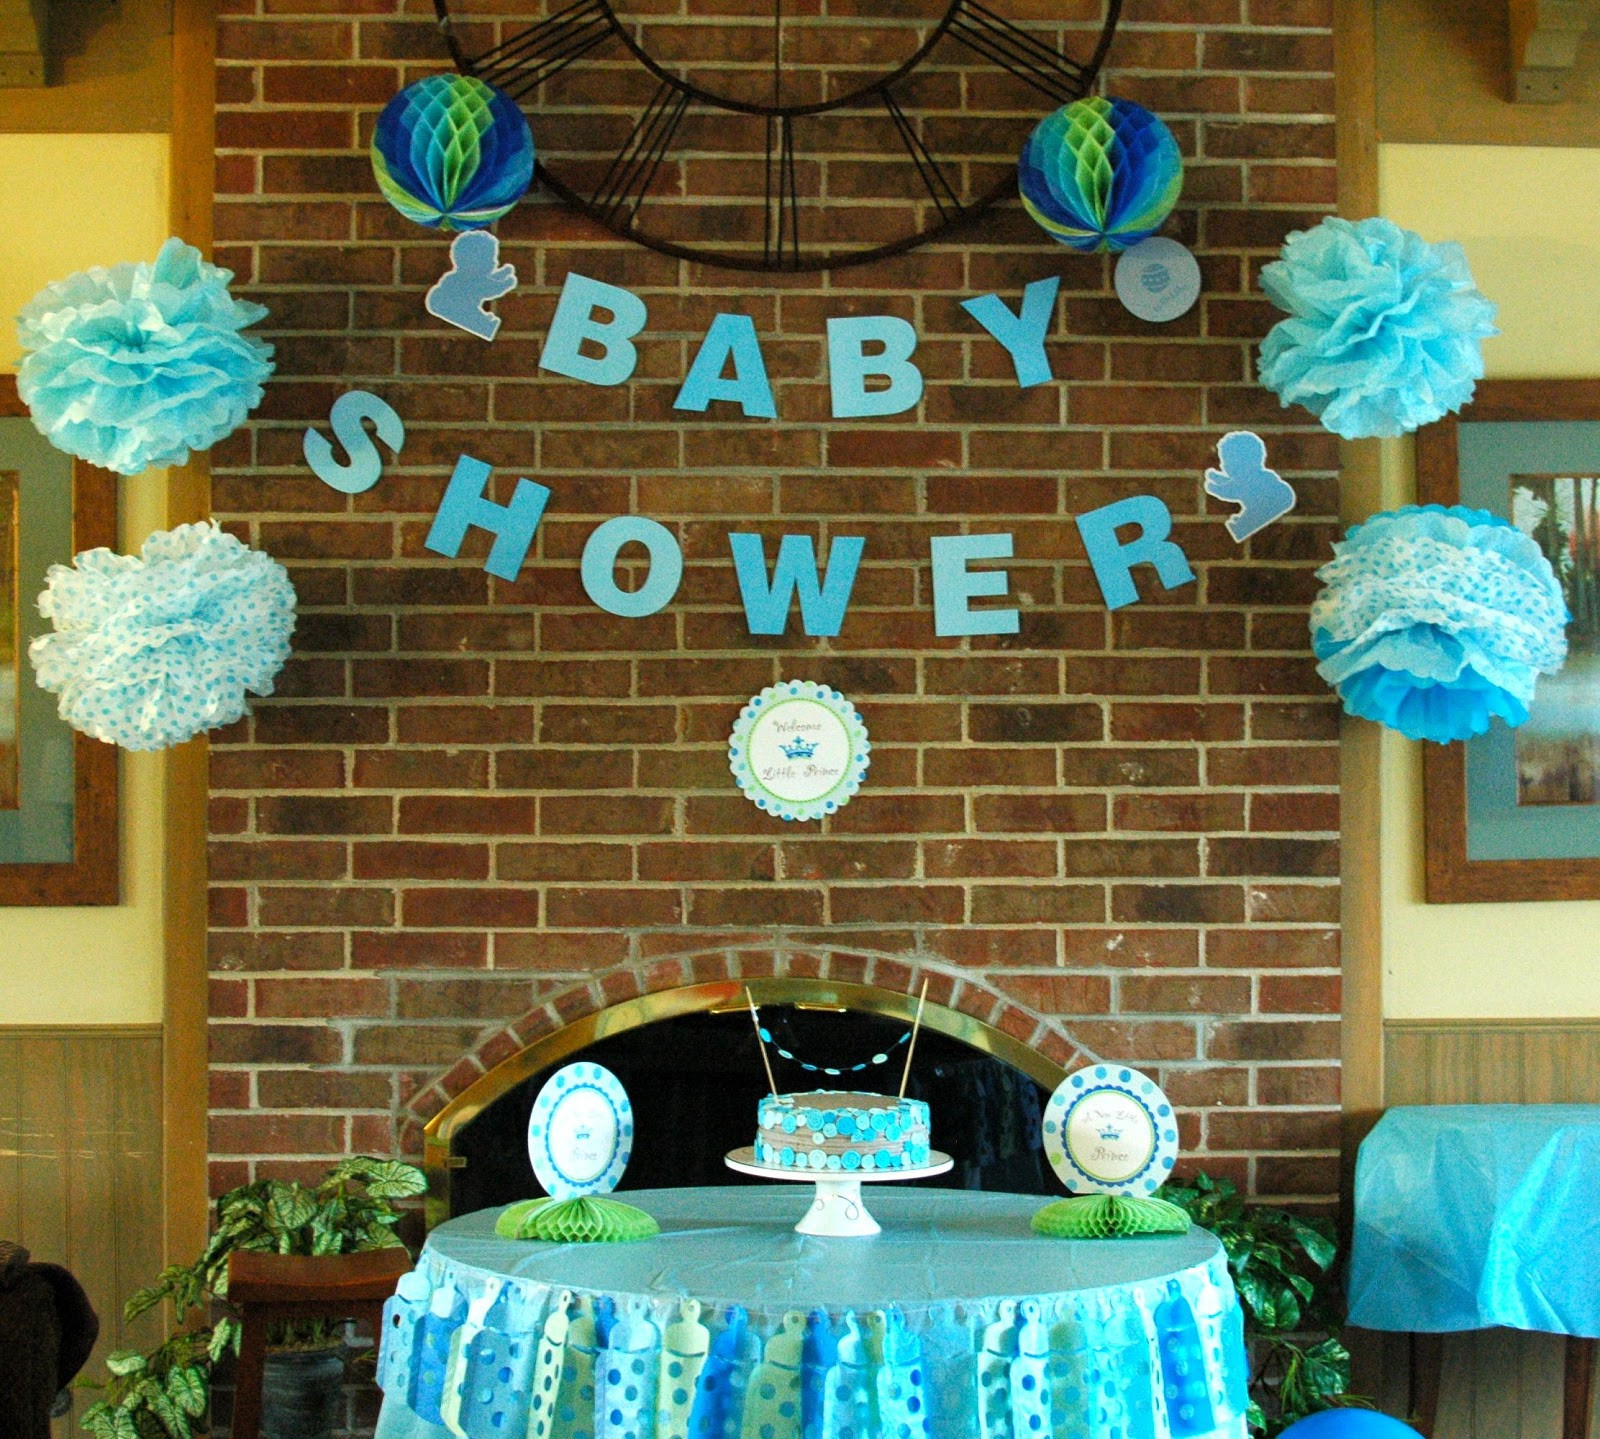 Baby Shower Room Decorations
 TurtleCraftyGirl Cute As a Button Baby Shower Cake